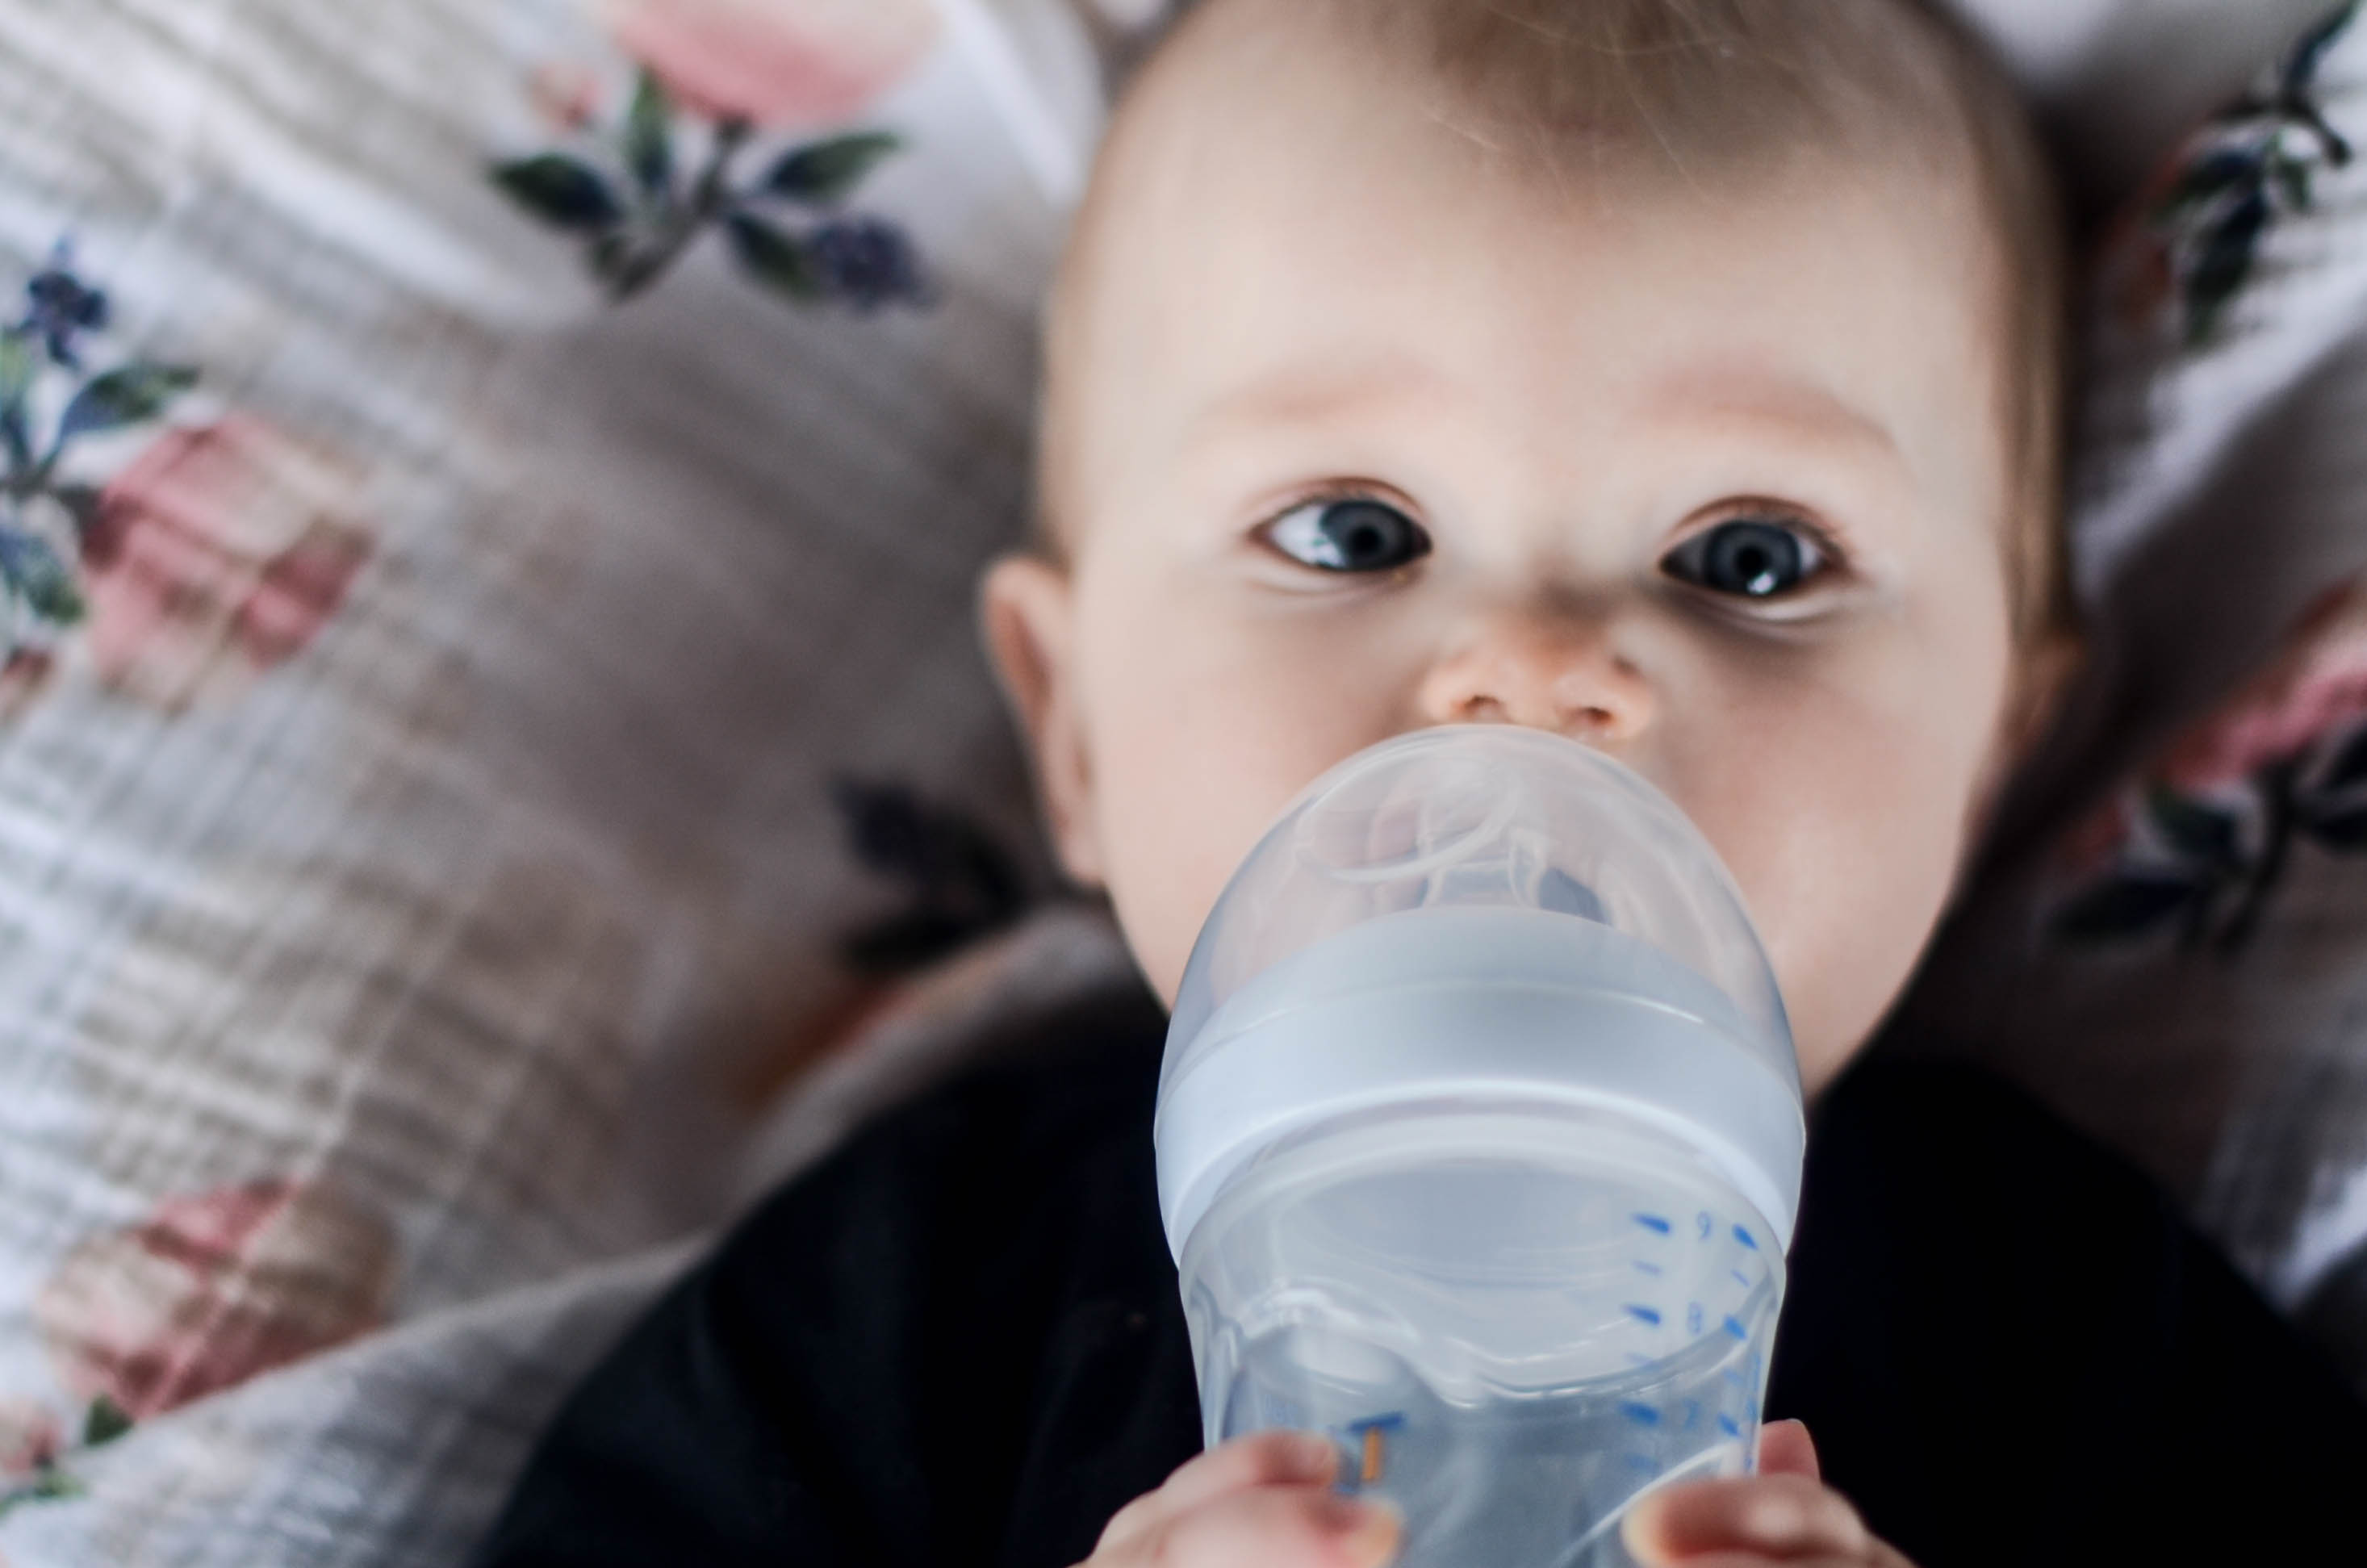 5 Tips for Indroducing Bottles to Babies